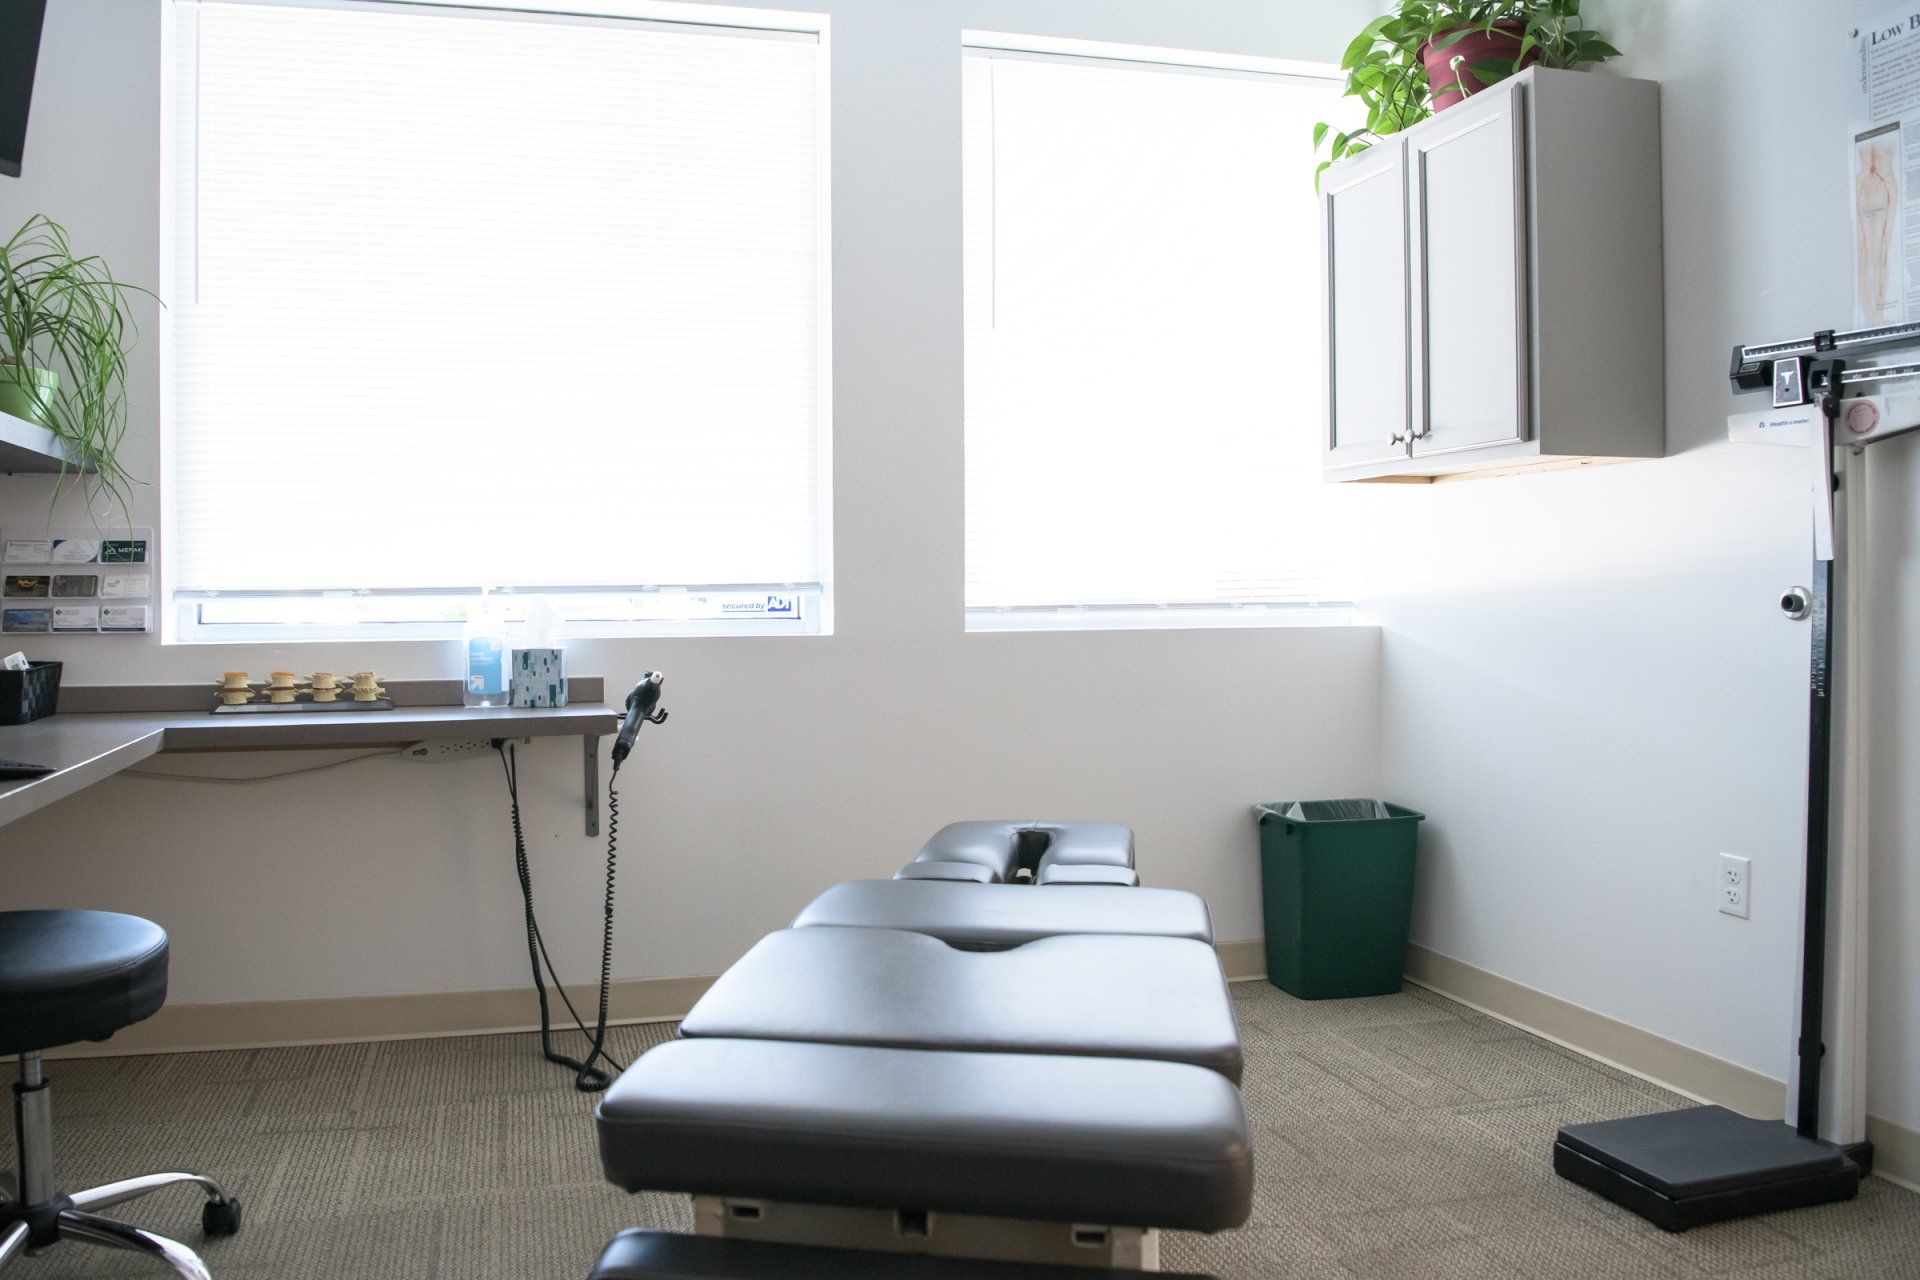 Picture of a Chiropractic Treating Room